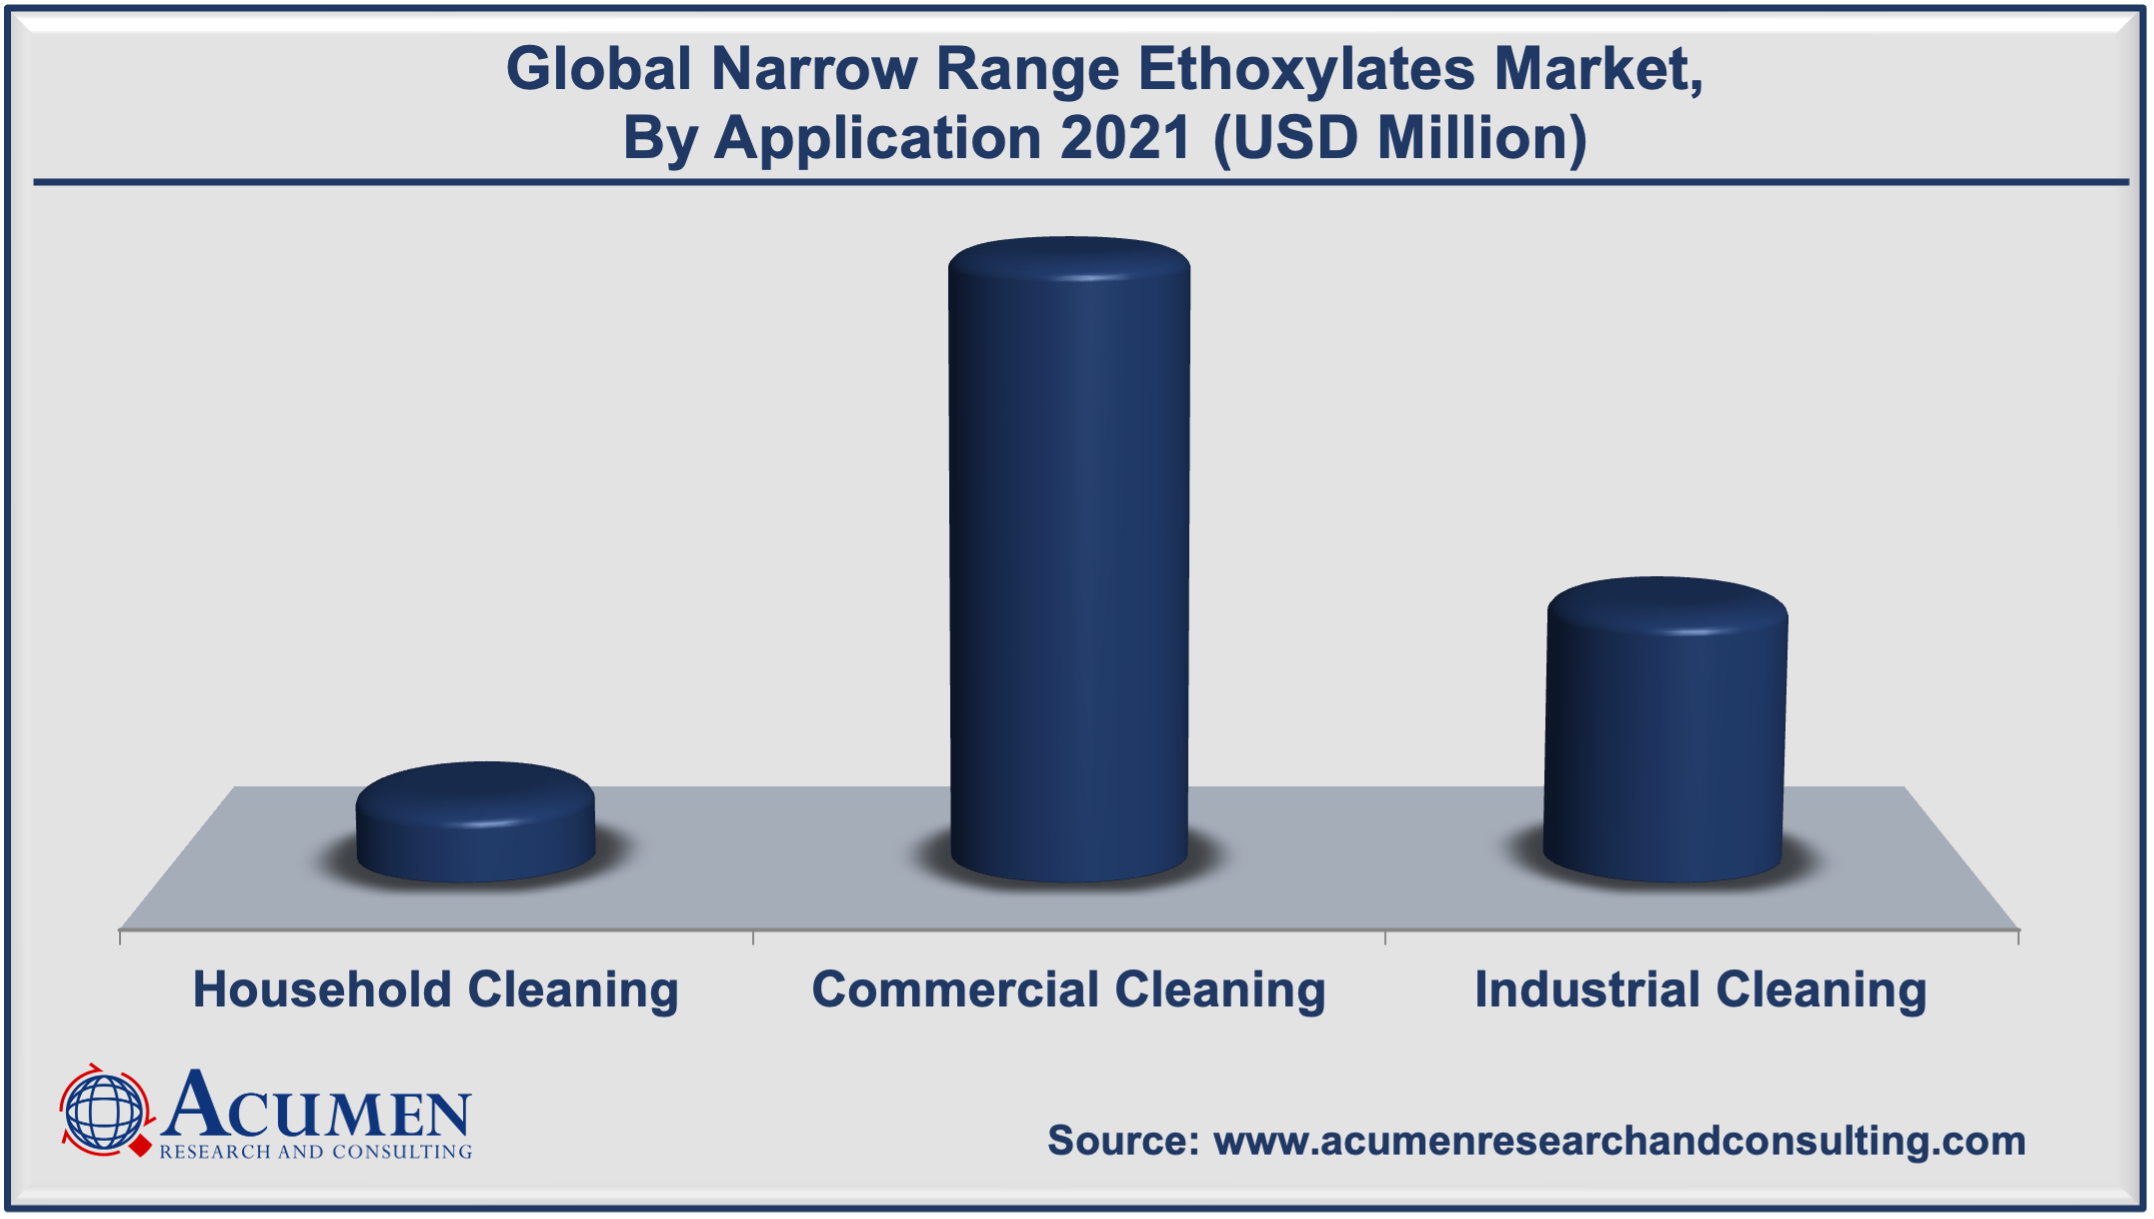 Narrow Range Ethoxylates Market Share accounted for USD 4,488 Million in 2021 and is estimated to reach USD 10,084 Million by 2030.